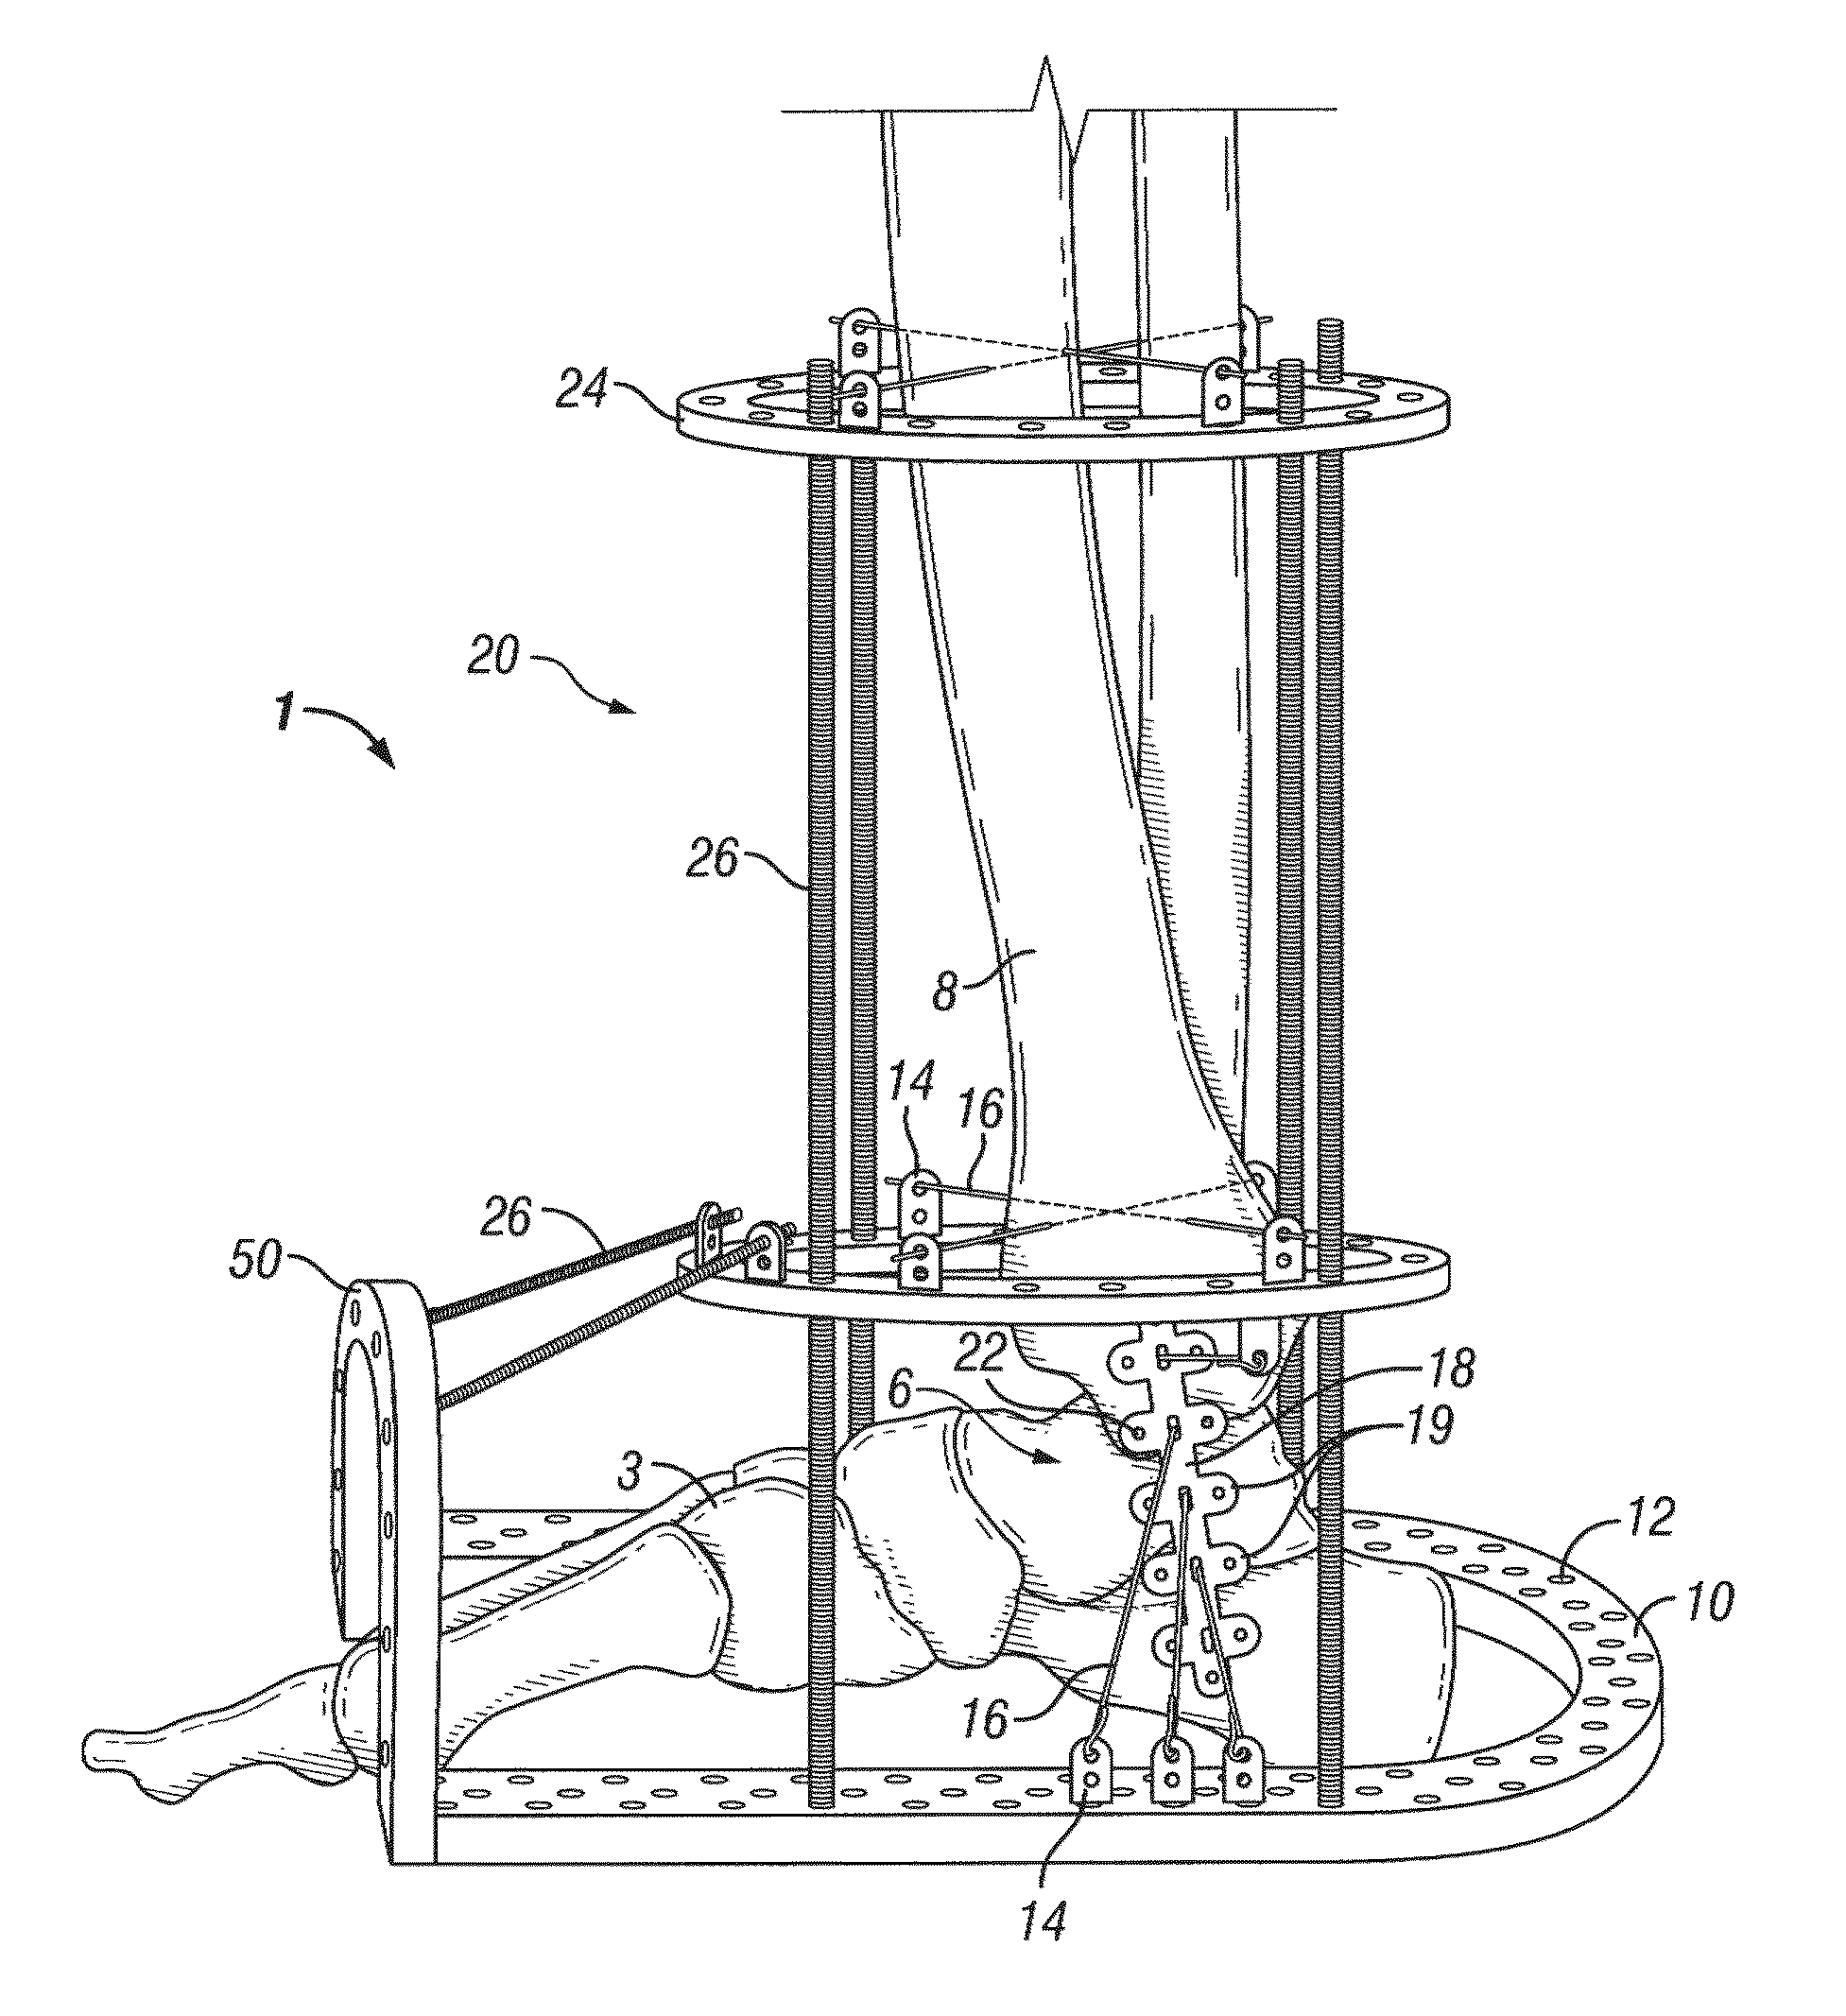 Foot, ankle and lower extremity compression and fixation system and related uses